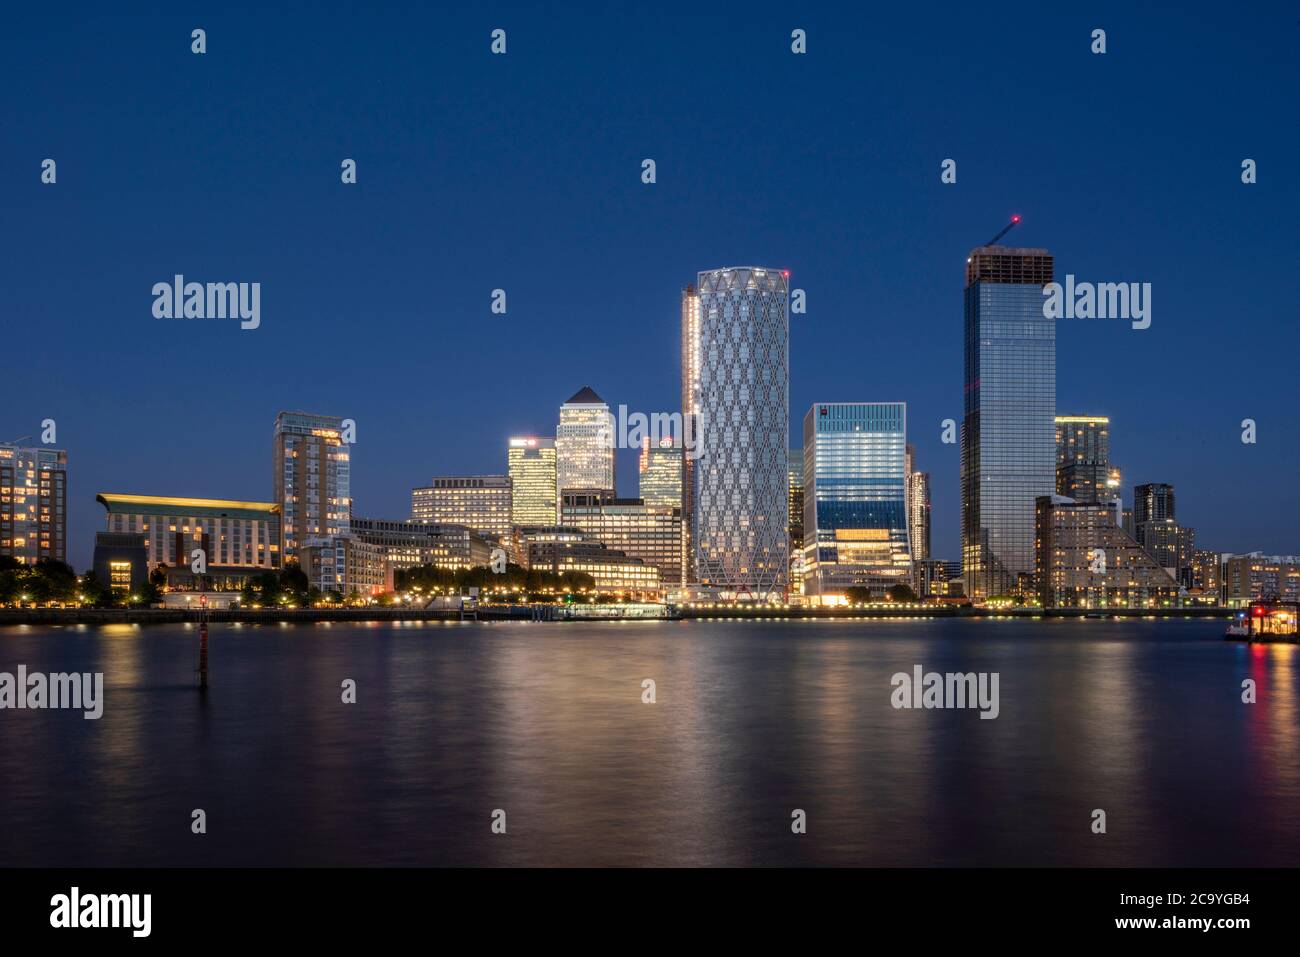 View across Thames from west at sunset with reflection in water. Isle of Dogs, London, United Kingdom. Architect: Various, 2020. Stock Photo